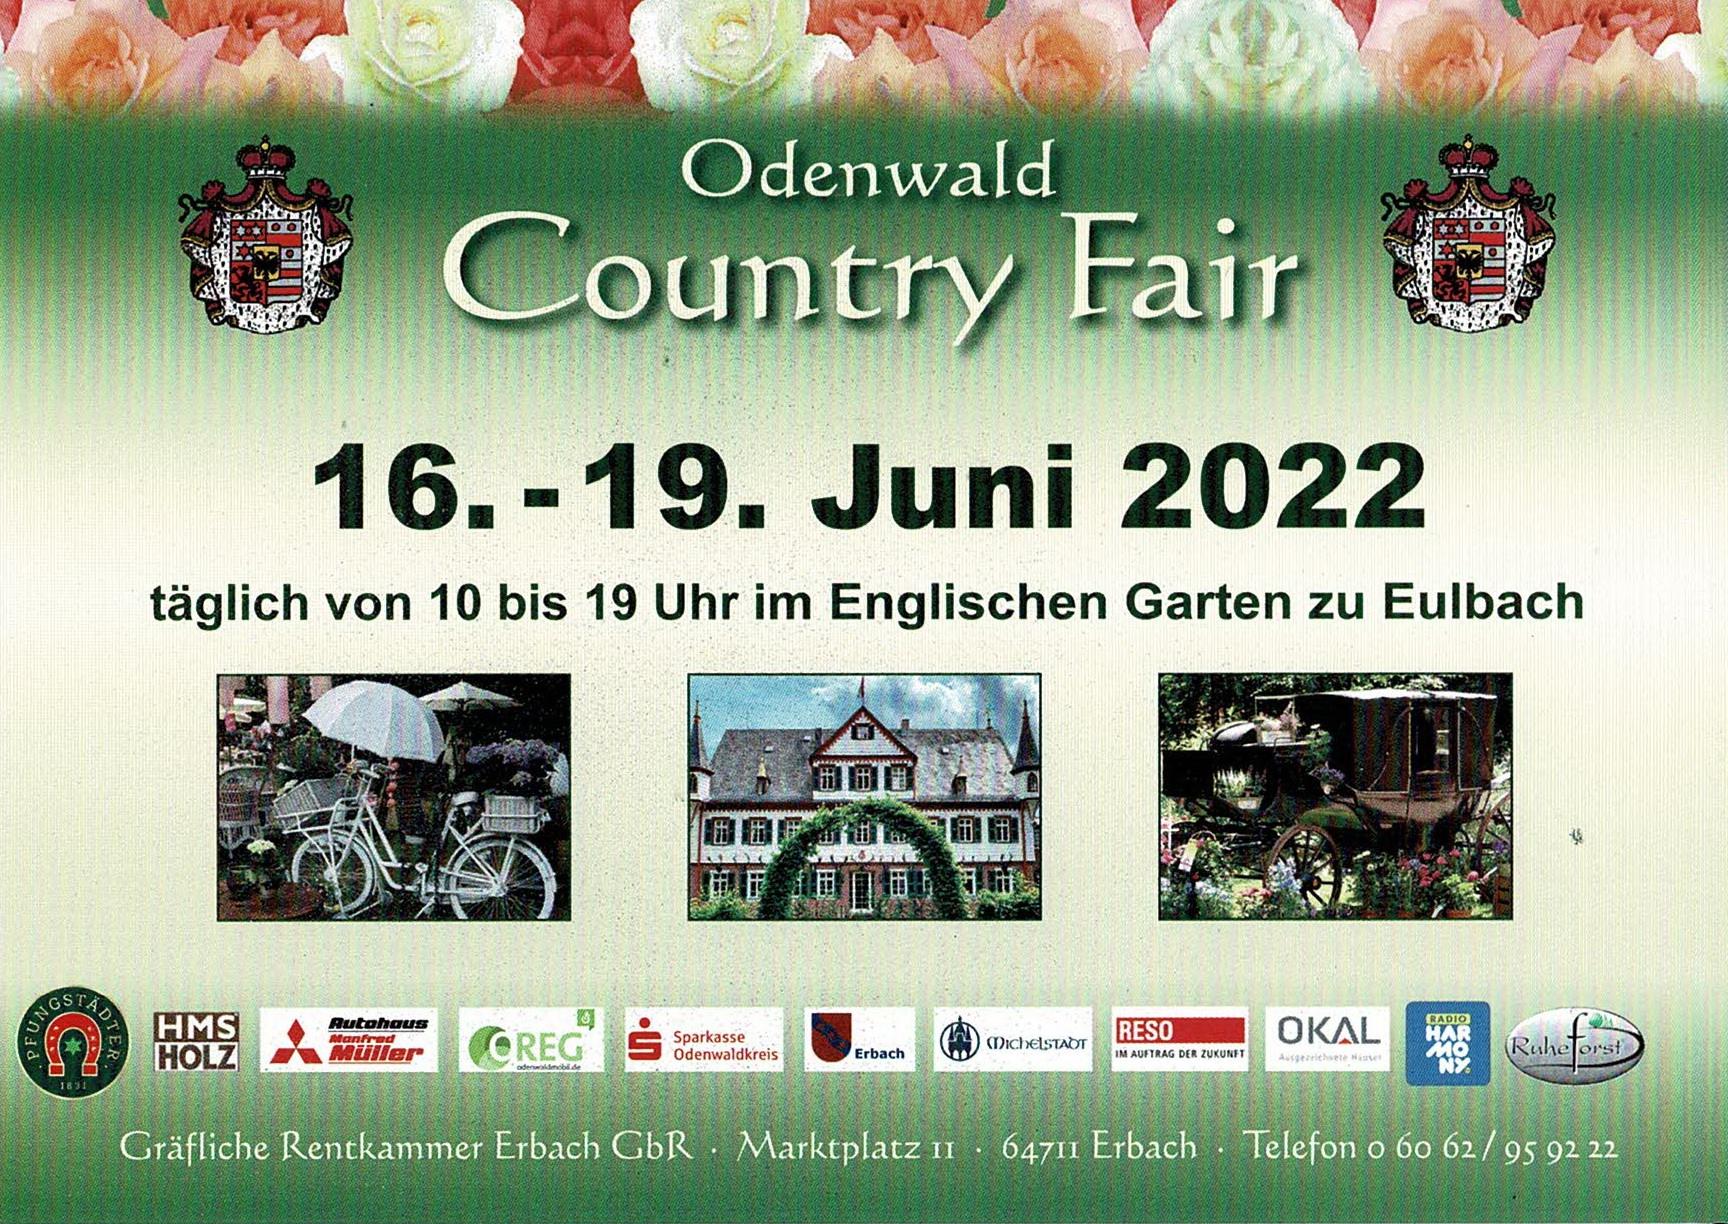 Odenwald Country Fair 2022